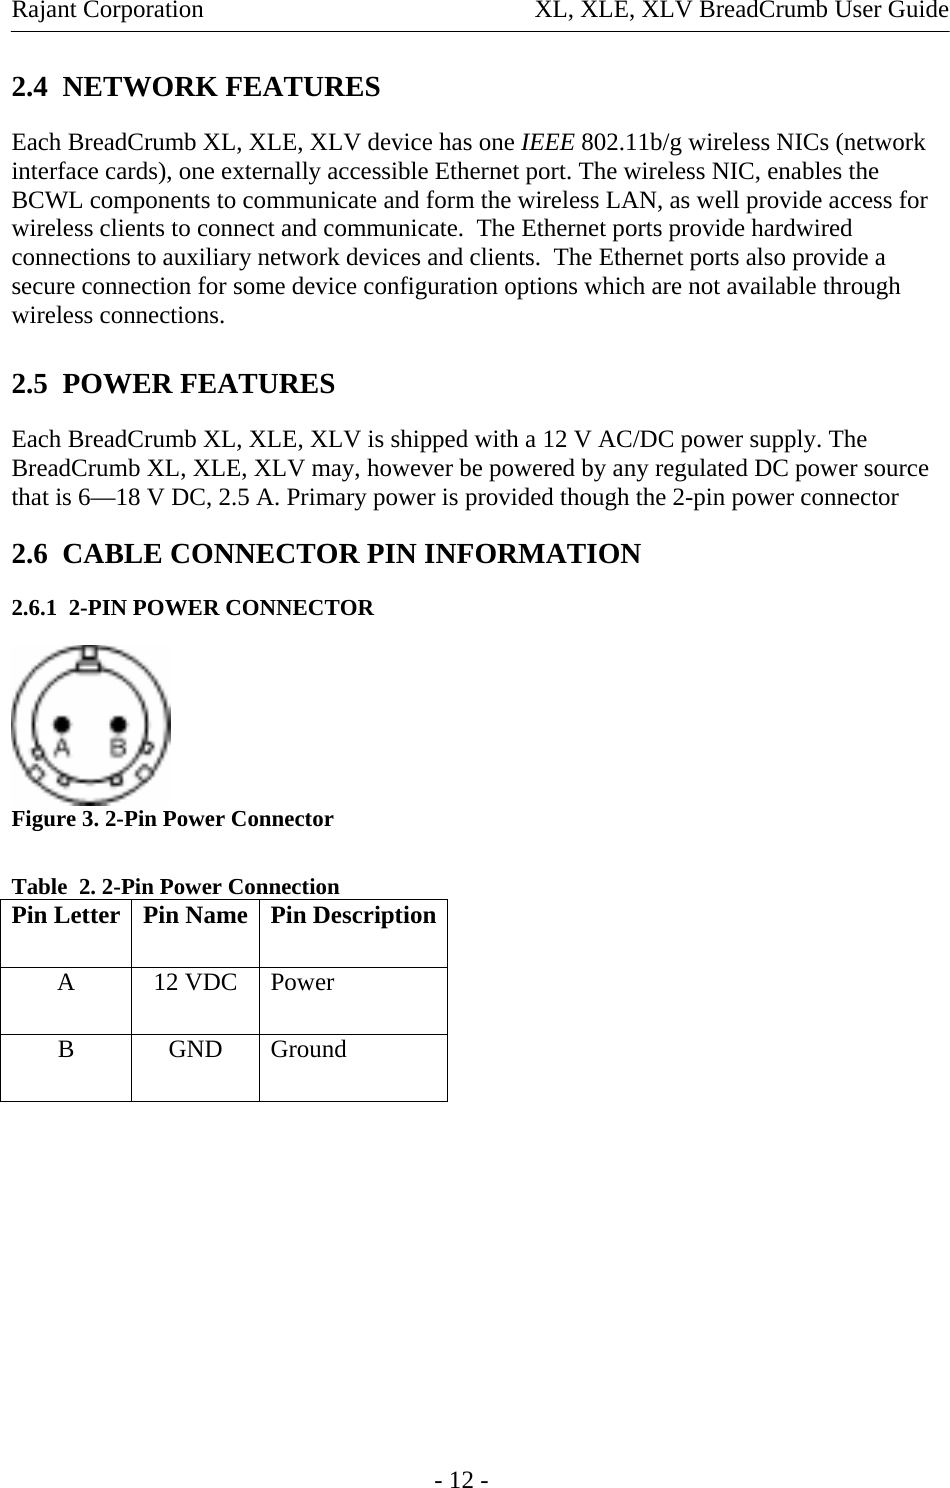 Rajant Corporation  XL, XLE, XLV BreadCrumb User Guide 2.4  NETWORK FEATURES Each BreadCrumb XL, XLE, XLV device has one IEEE 802.11b/g wireless NICs (network interface cards), one externally accessible Ethernet port. The wireless NIC, enables the BCWL components to communicate and form the wireless LAN, as well provide access for wireless clients to connect and communicate.  The Ethernet ports provide hardwired connections to auxiliary network devices and clients.  The Ethernet ports also provide a secure connection for some device configuration options which are not available through wireless connections.  2.5  POWER FEATURES Each BreadCrumb XL, XLE, XLV is shipped with a 12 V AC/DC power supply. The BreadCrumb XL, XLE, XLV may, however be powered by any regulated DC power source that is 6—18 V DC, 2.5 A. Primary power is provided though the 2-pin power connector  2.6  CABLE CONNECTOR PIN INFORMATION 2.6.1  2-PIN POWER CONNECTOR  Figure 3. 2-Pin Power Connector  Table  2. 2-Pin Power Connection Pin Letter  Pin Name  Pin DescriptionA 12 VDC Power B GND Ground          - 12 - 